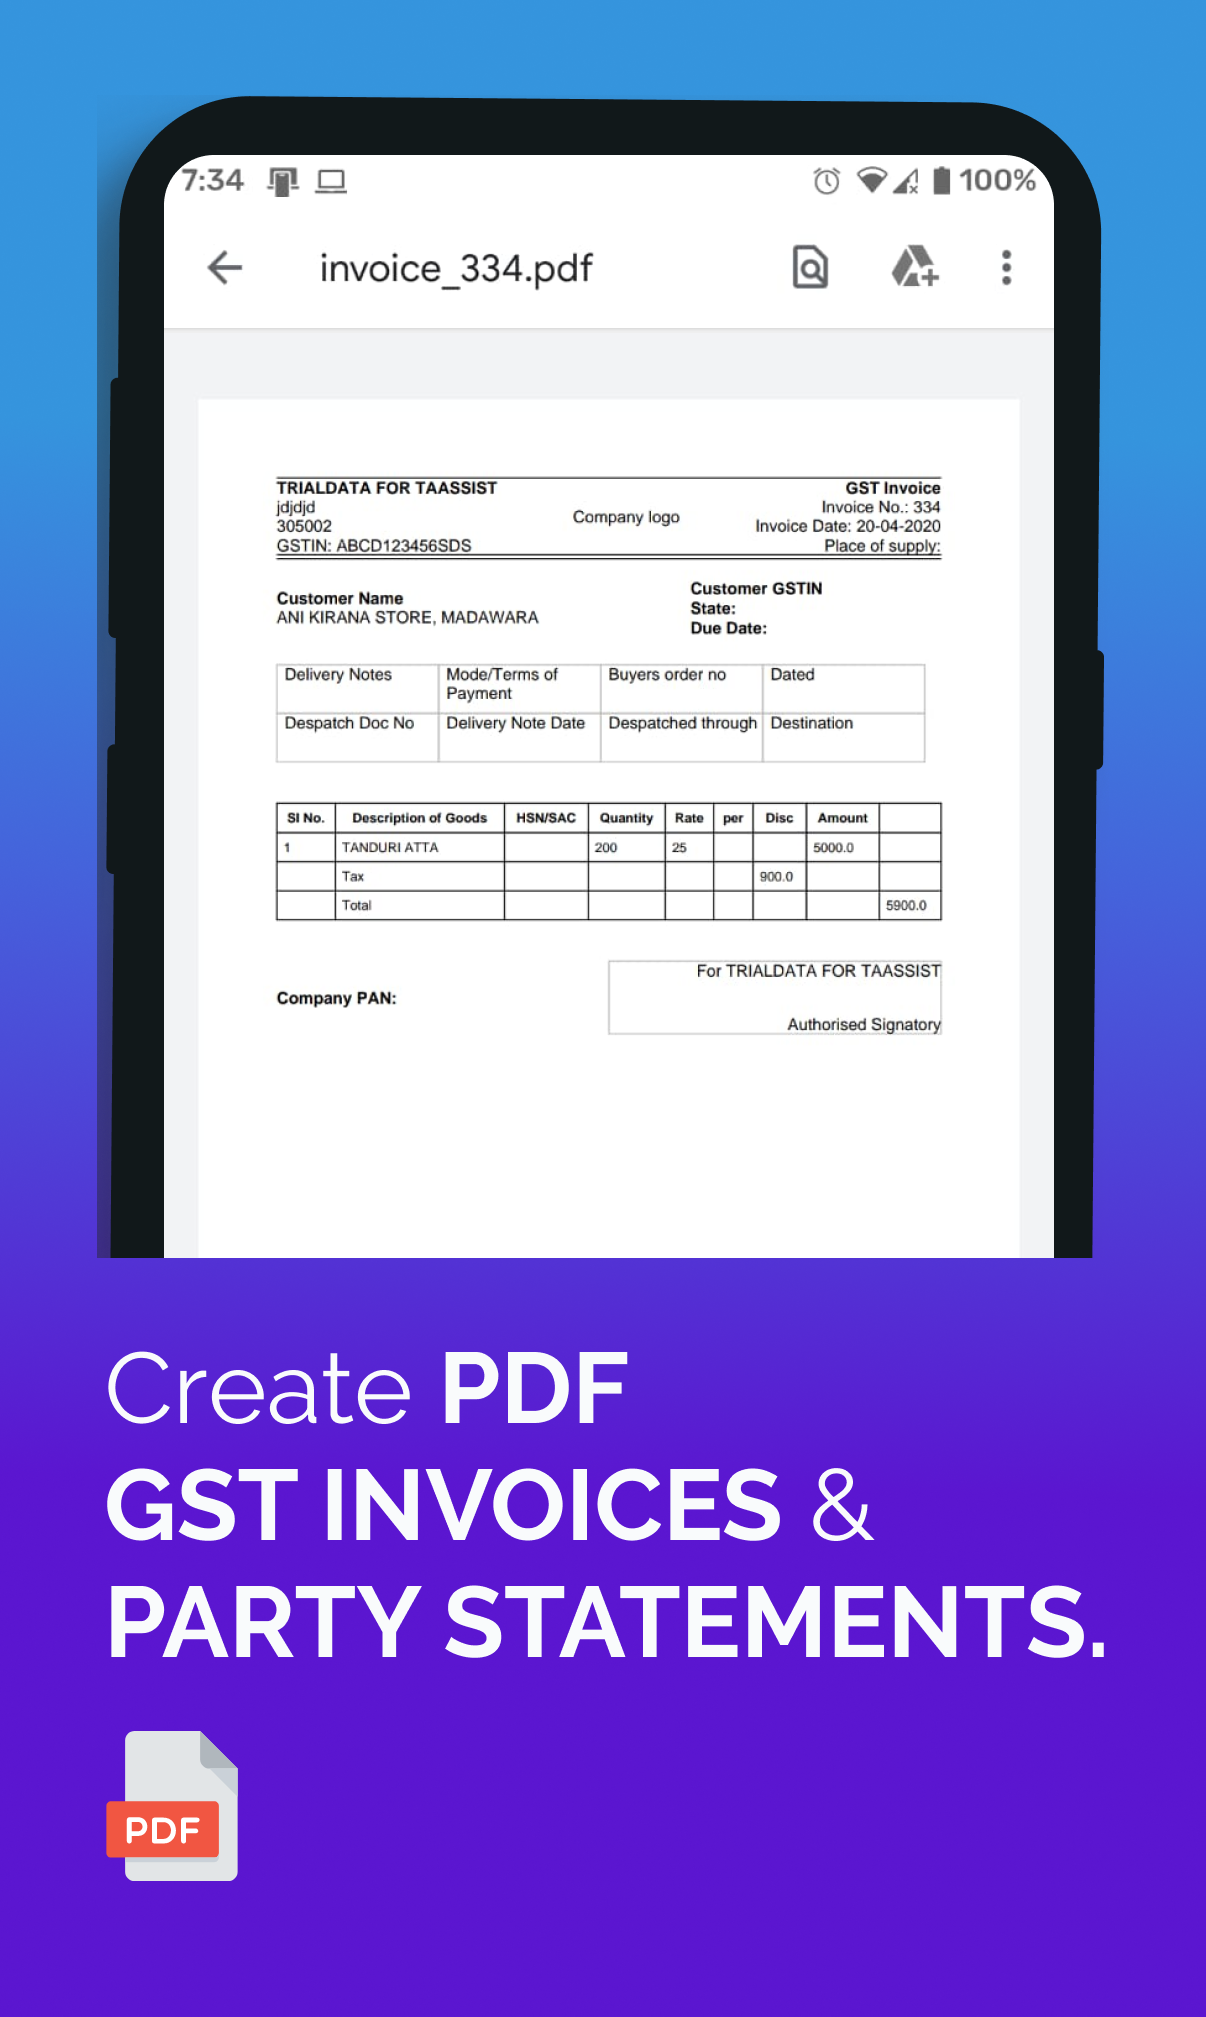 Invoice PDFs